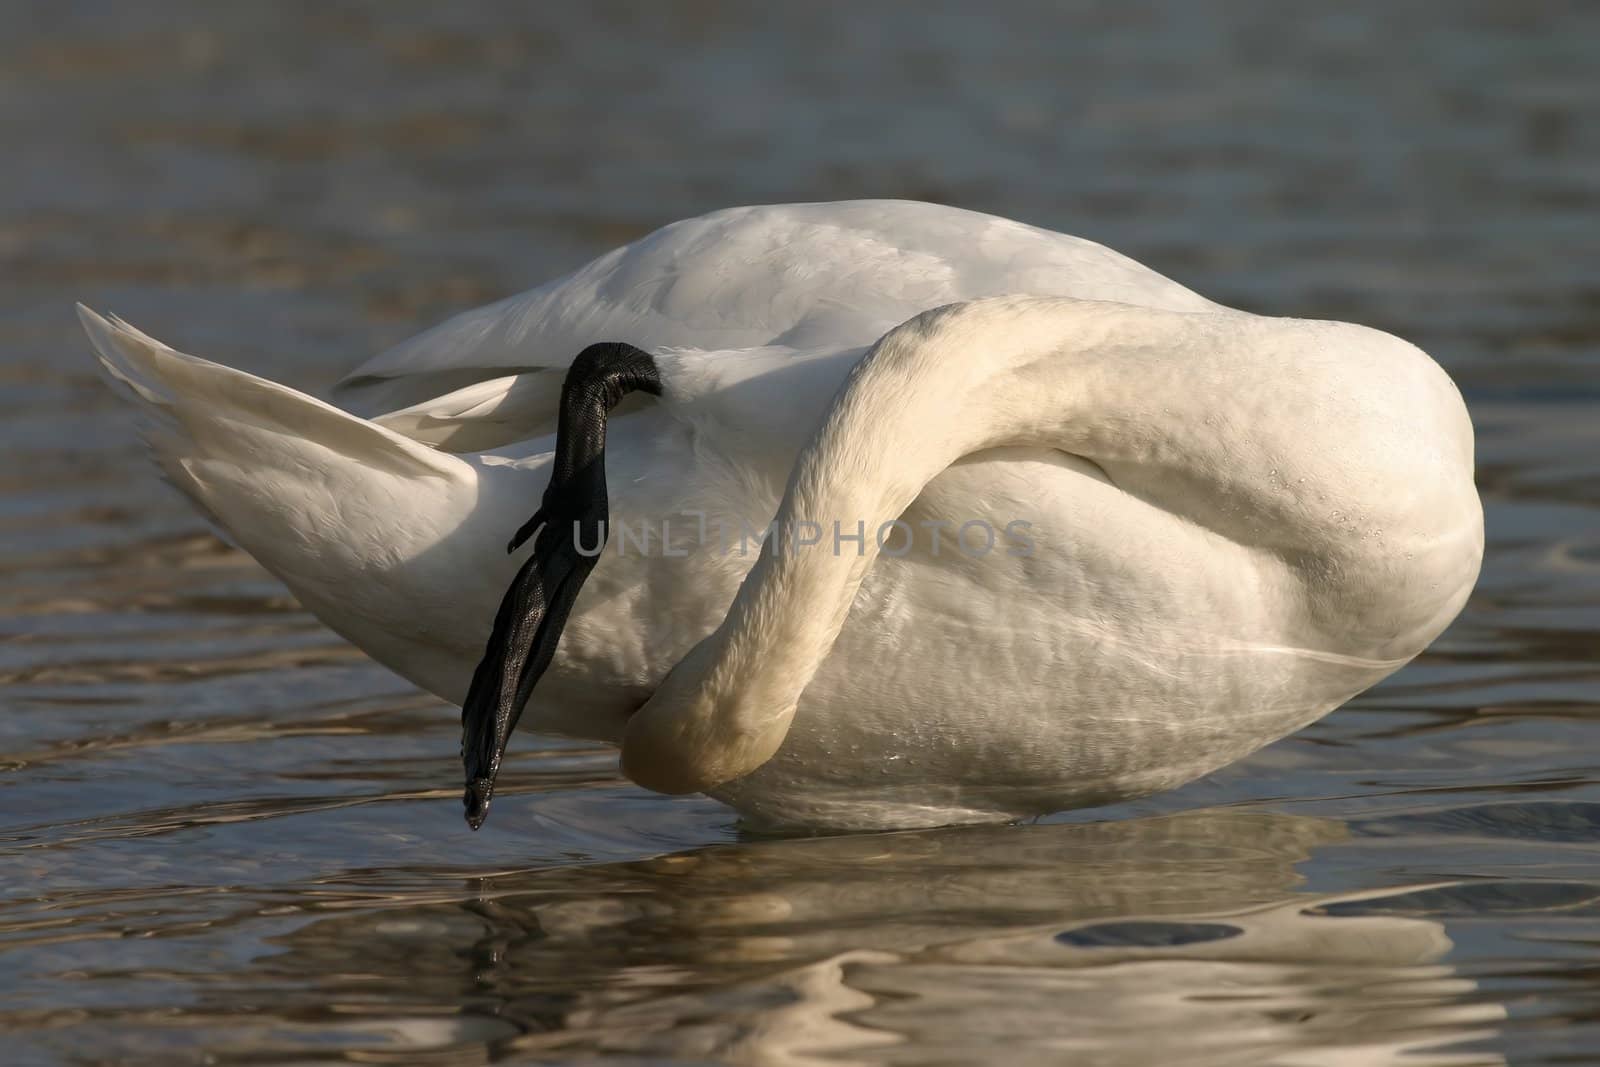 swan claning itself in water